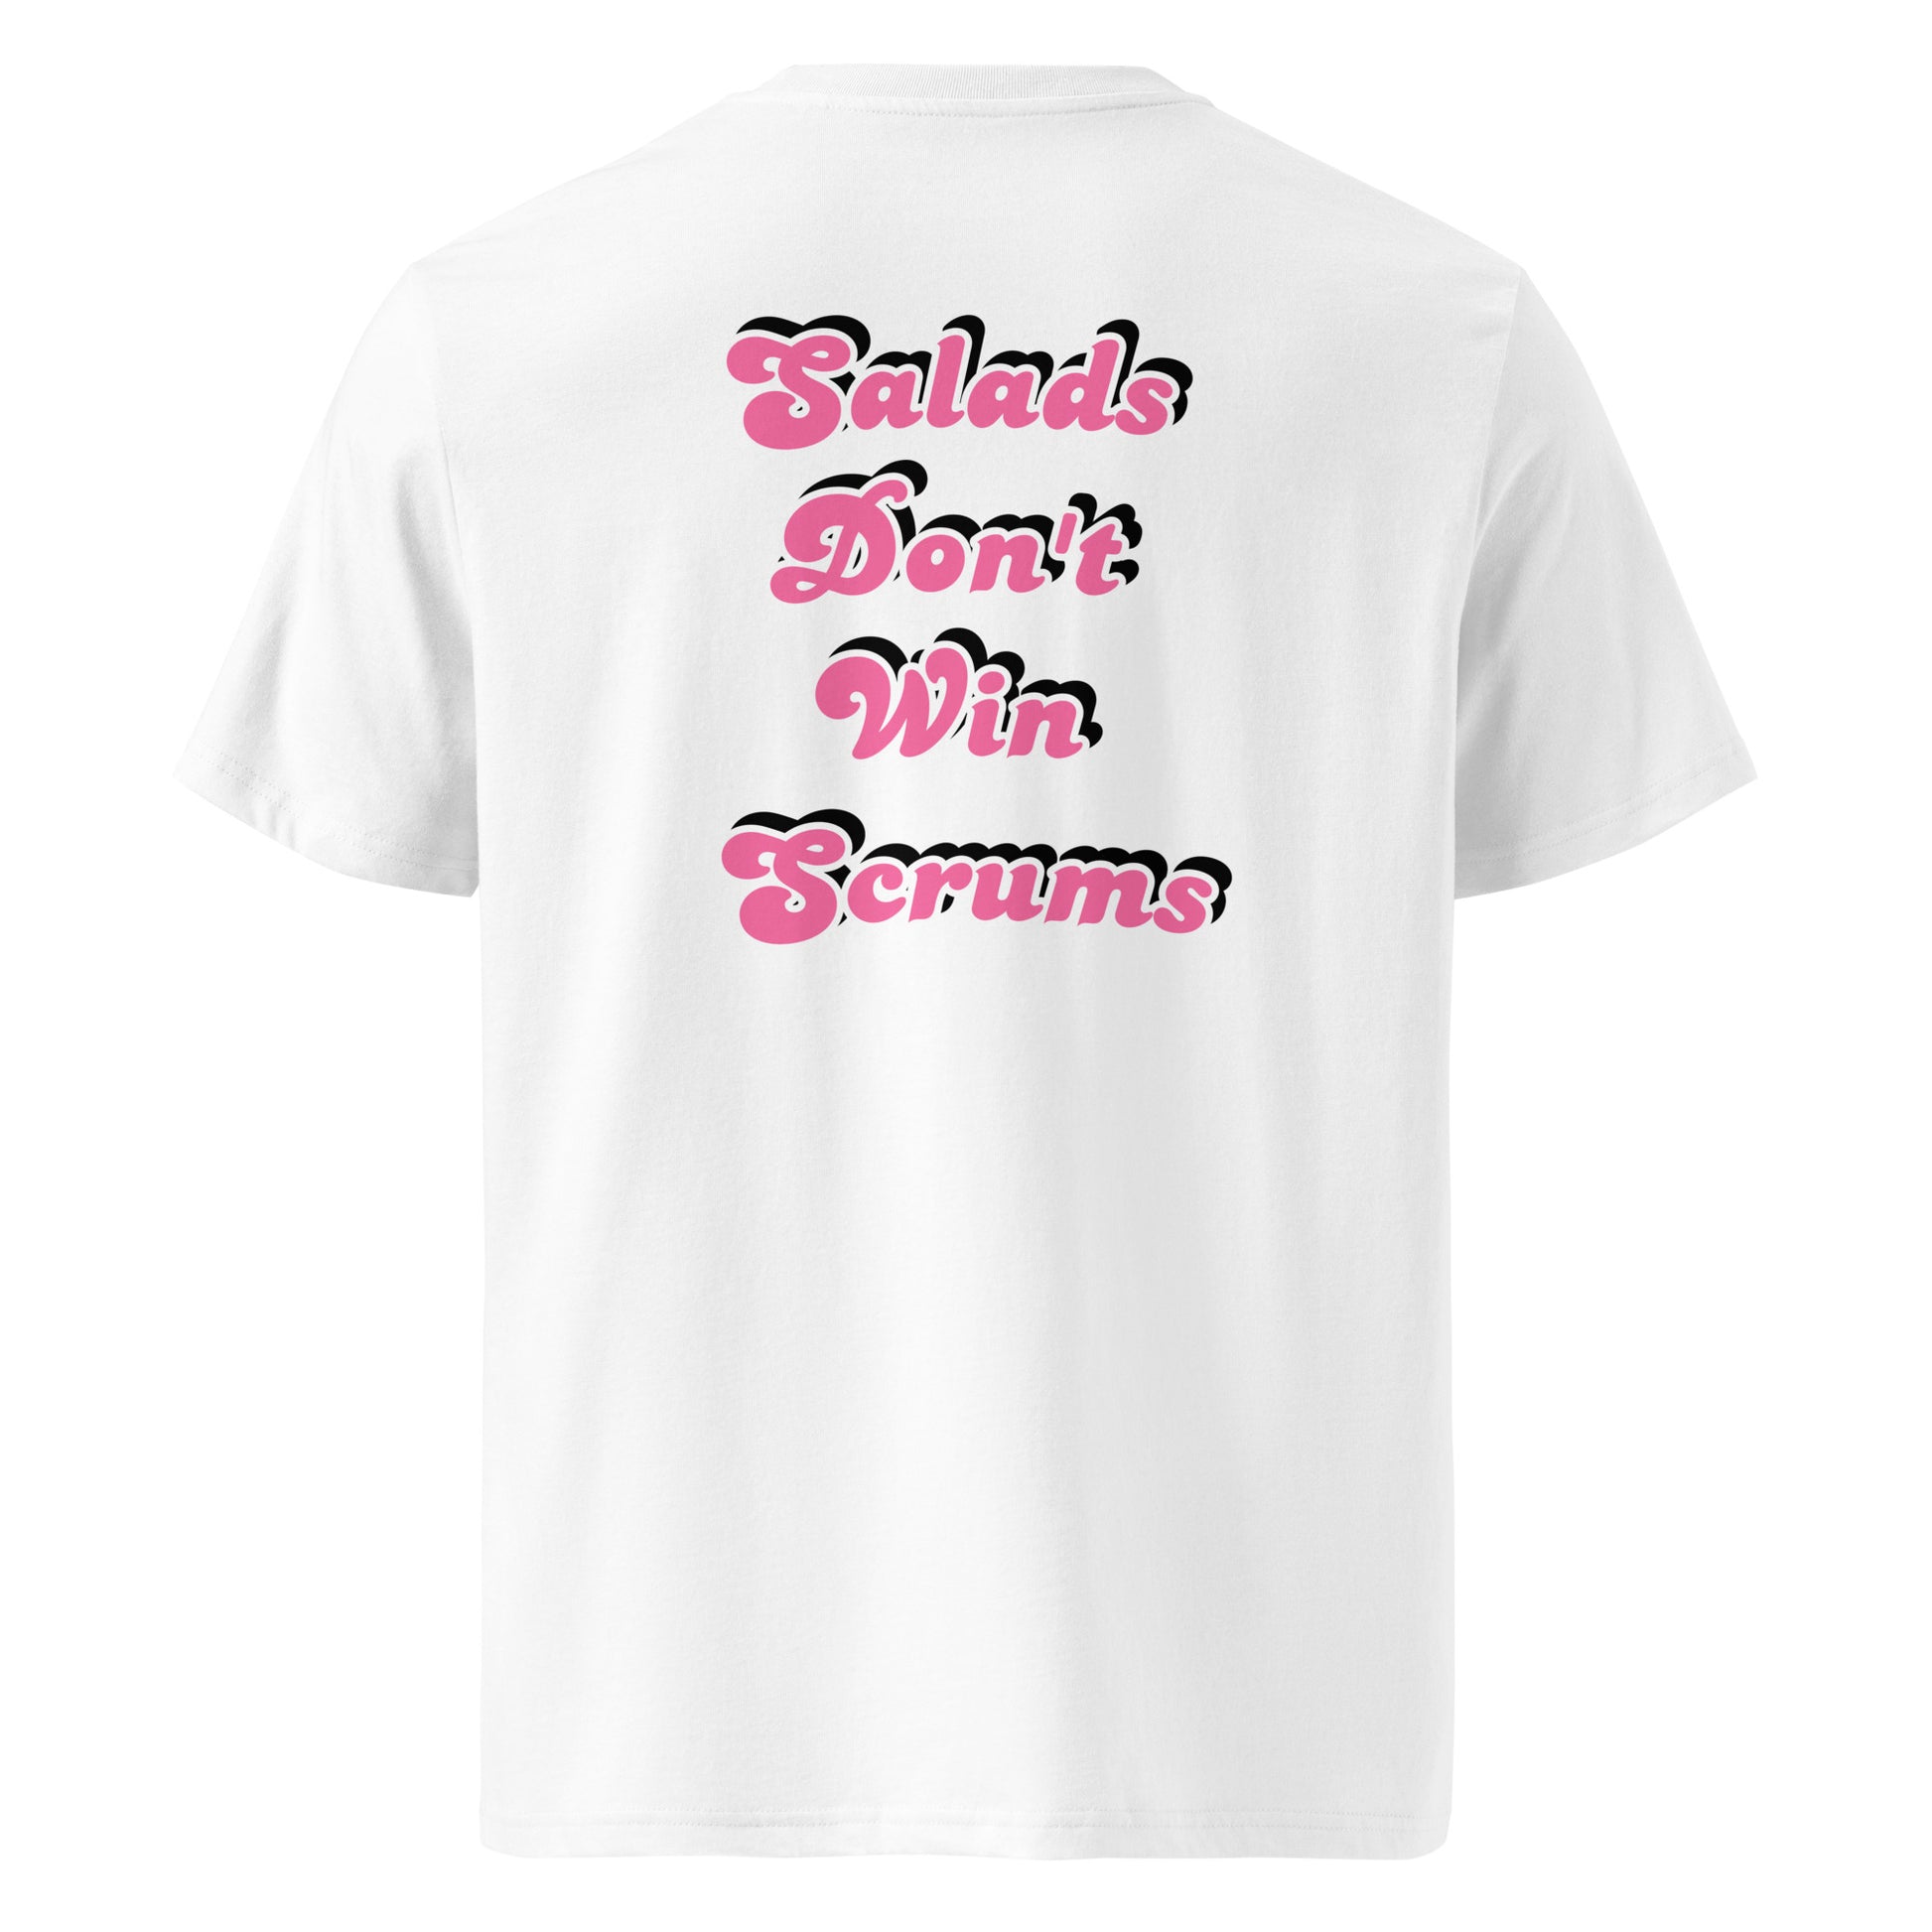 Salads Don't Win Scrums T-Shirt - White/Pink